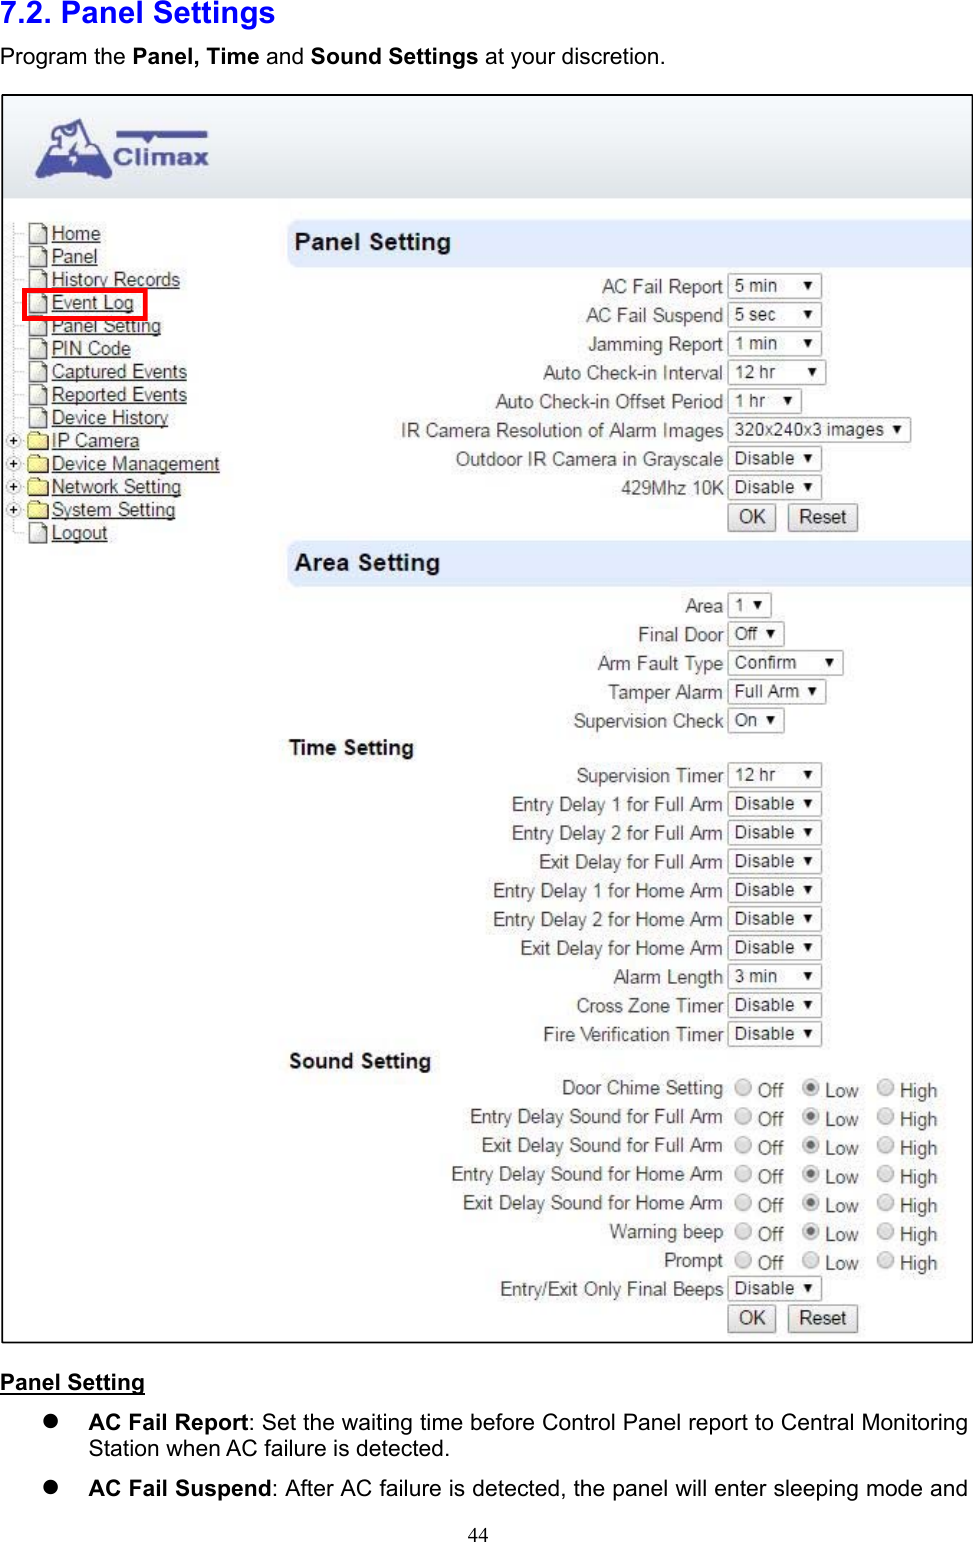  447.2. Panel Settings   Program the Panel, Time and Sound Settings at your discretion.  Panel Setting  AC Fail Report: Set the waiting time before Control Panel report to Central Monitoring Station when AC failure is detected.    AC Fail Suspend: After AC failure is detected, the panel will enter sleeping mode and 